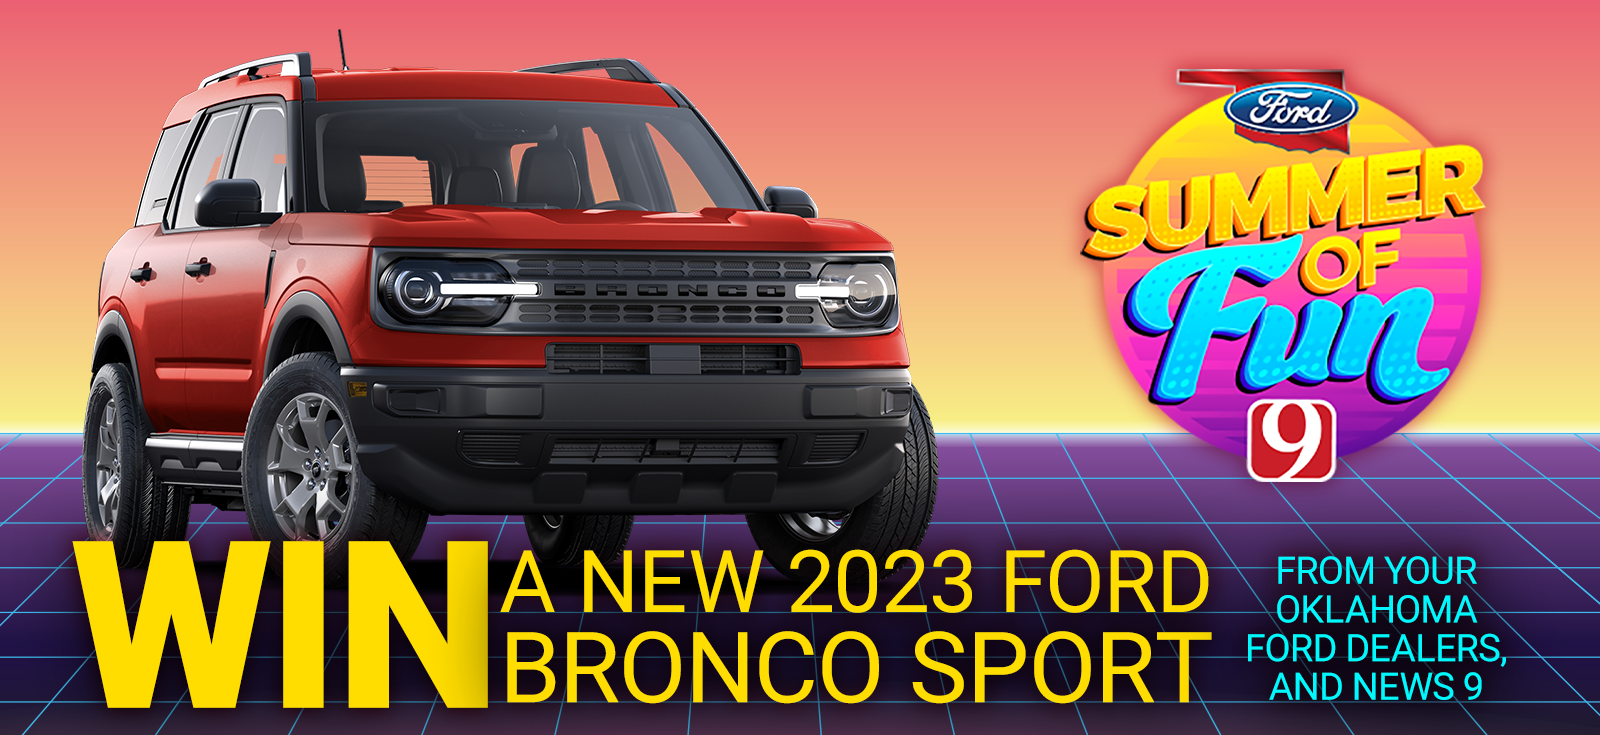 Win a 2023 FORD BRONCO SPORT from News 9